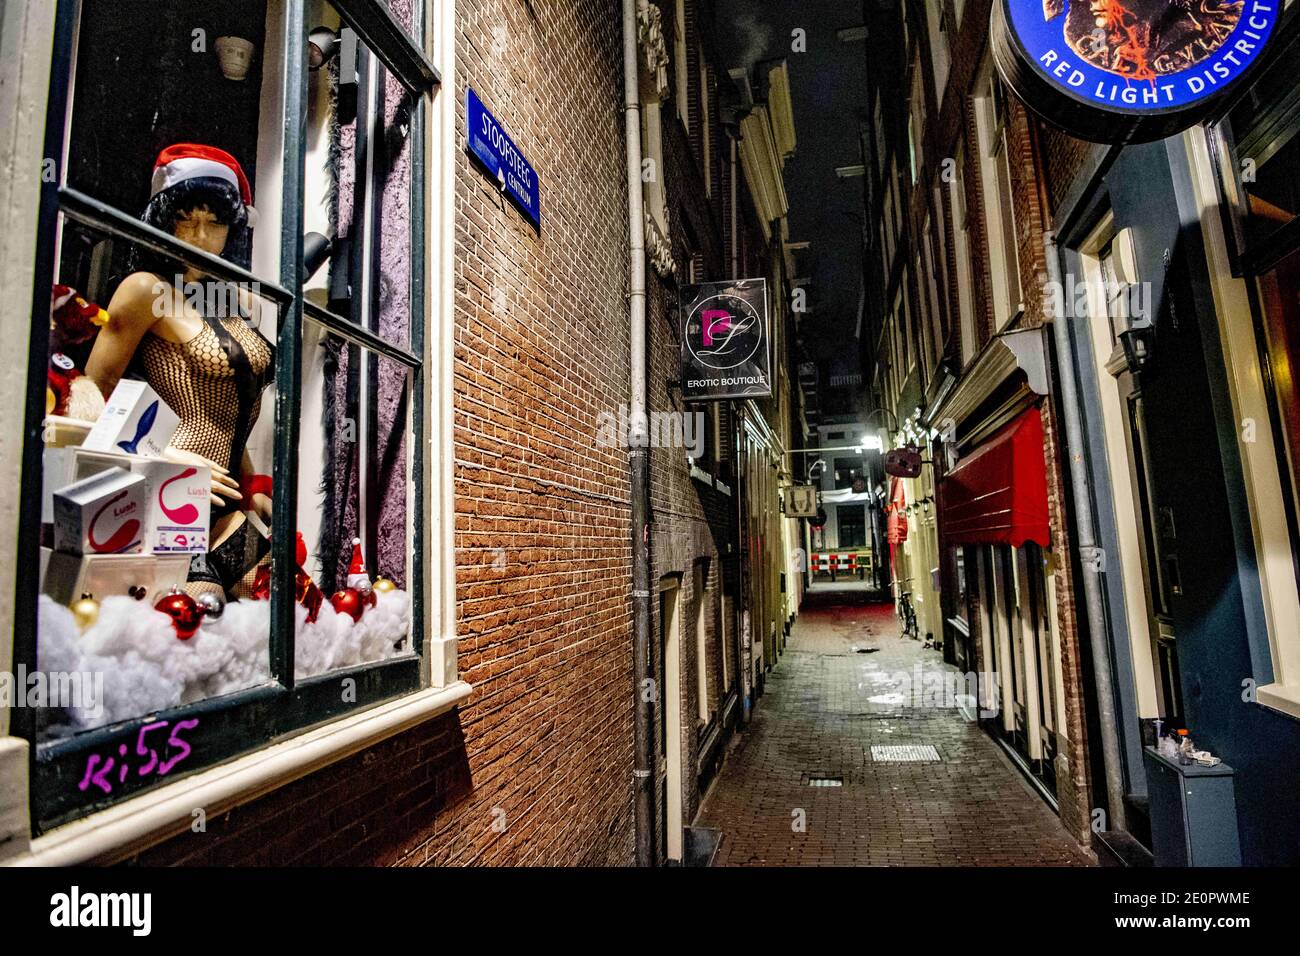 Amsterdam Netherlands 02nd Jan 2021 Empty Red Light District In Amsterdam The Netherlands On January 01 2020 During The Covid 19 Lockdown The Streets Are Quiet Due To The New Corona Rules And Measures The Windows Are Closed Completely Empty Some Red Lights Are Still Burning So Prostitutes Are Working Online Photo By Robin Utrechtabacapresscom Credit Abacapressalamy Live News 2E0PWME 